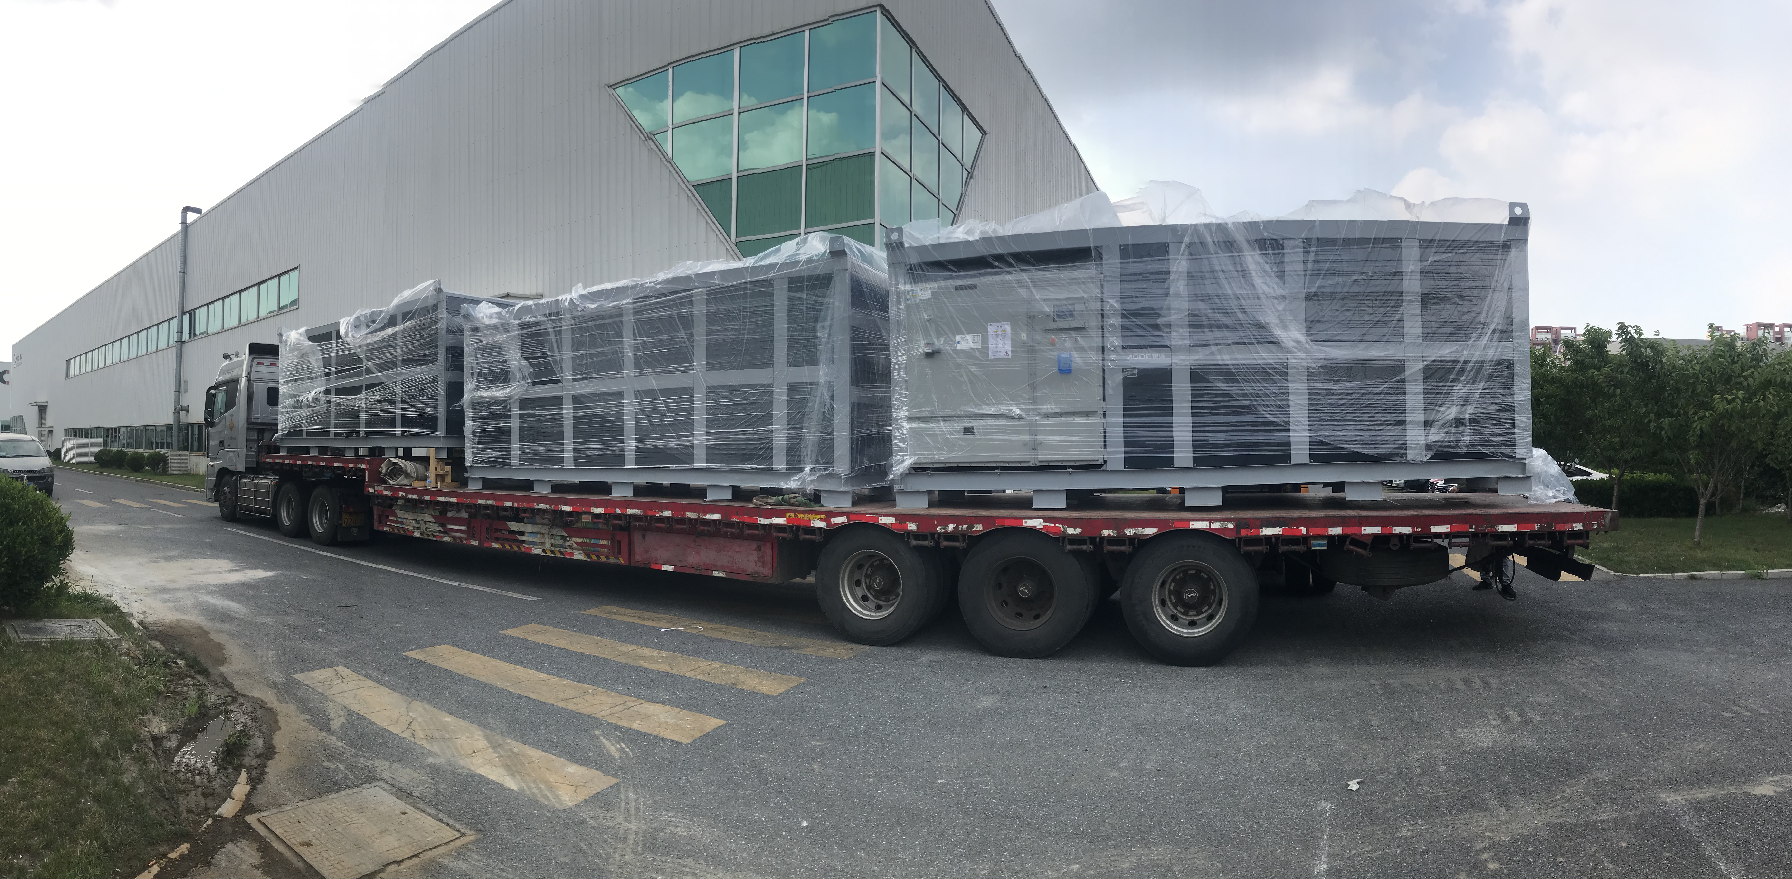 Water screw cooled chiller delivery